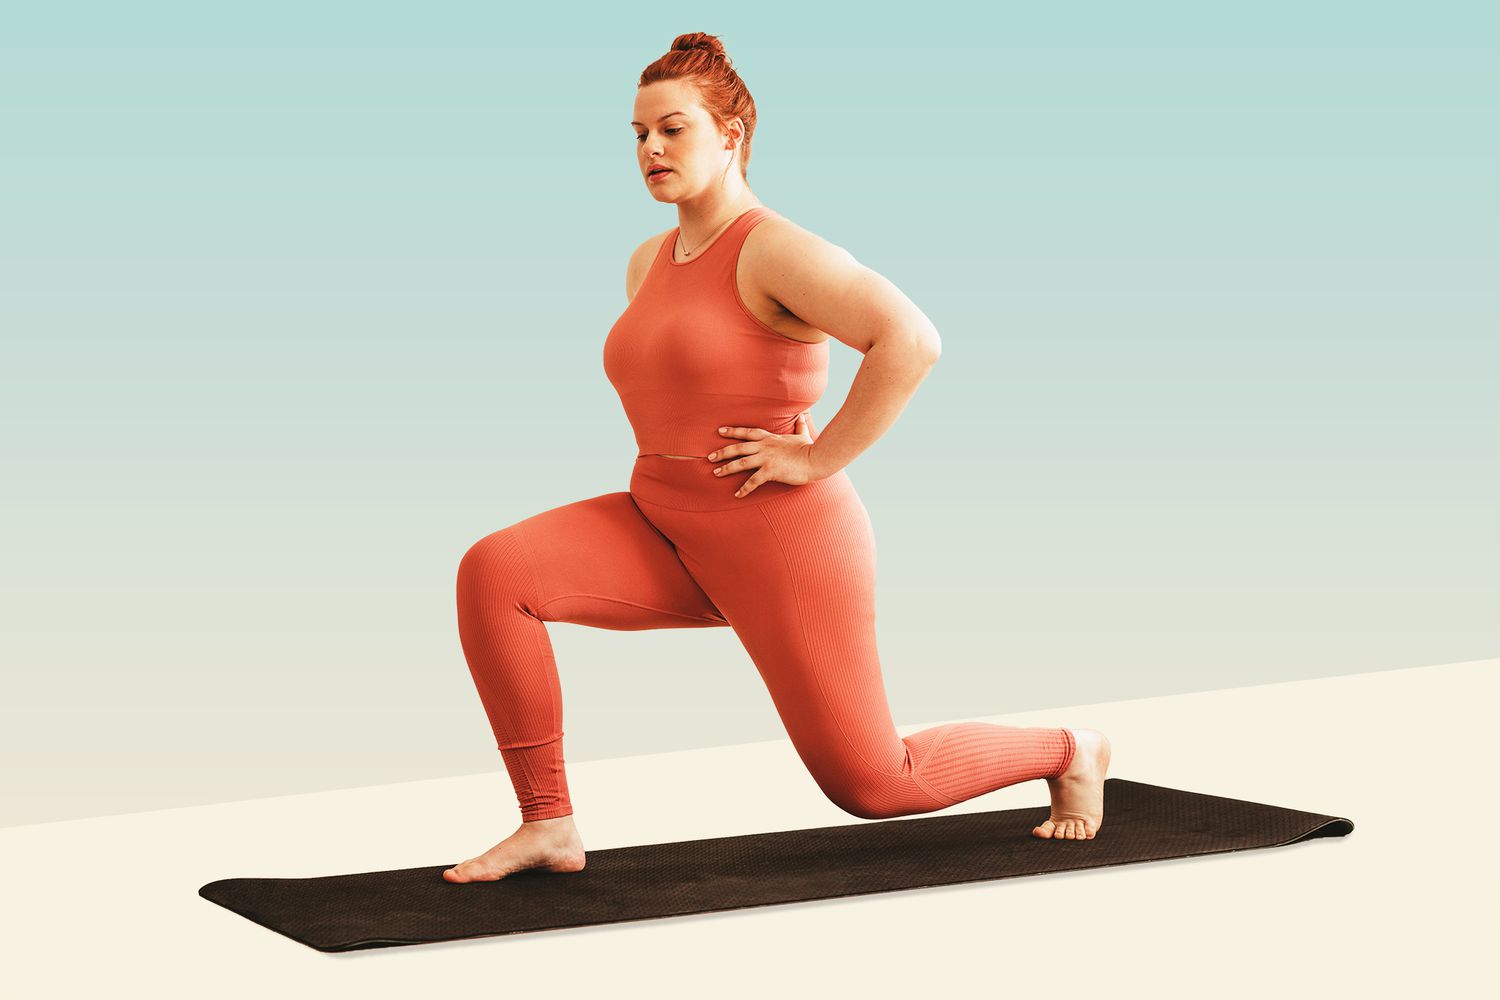 Woman exercising on a designed background